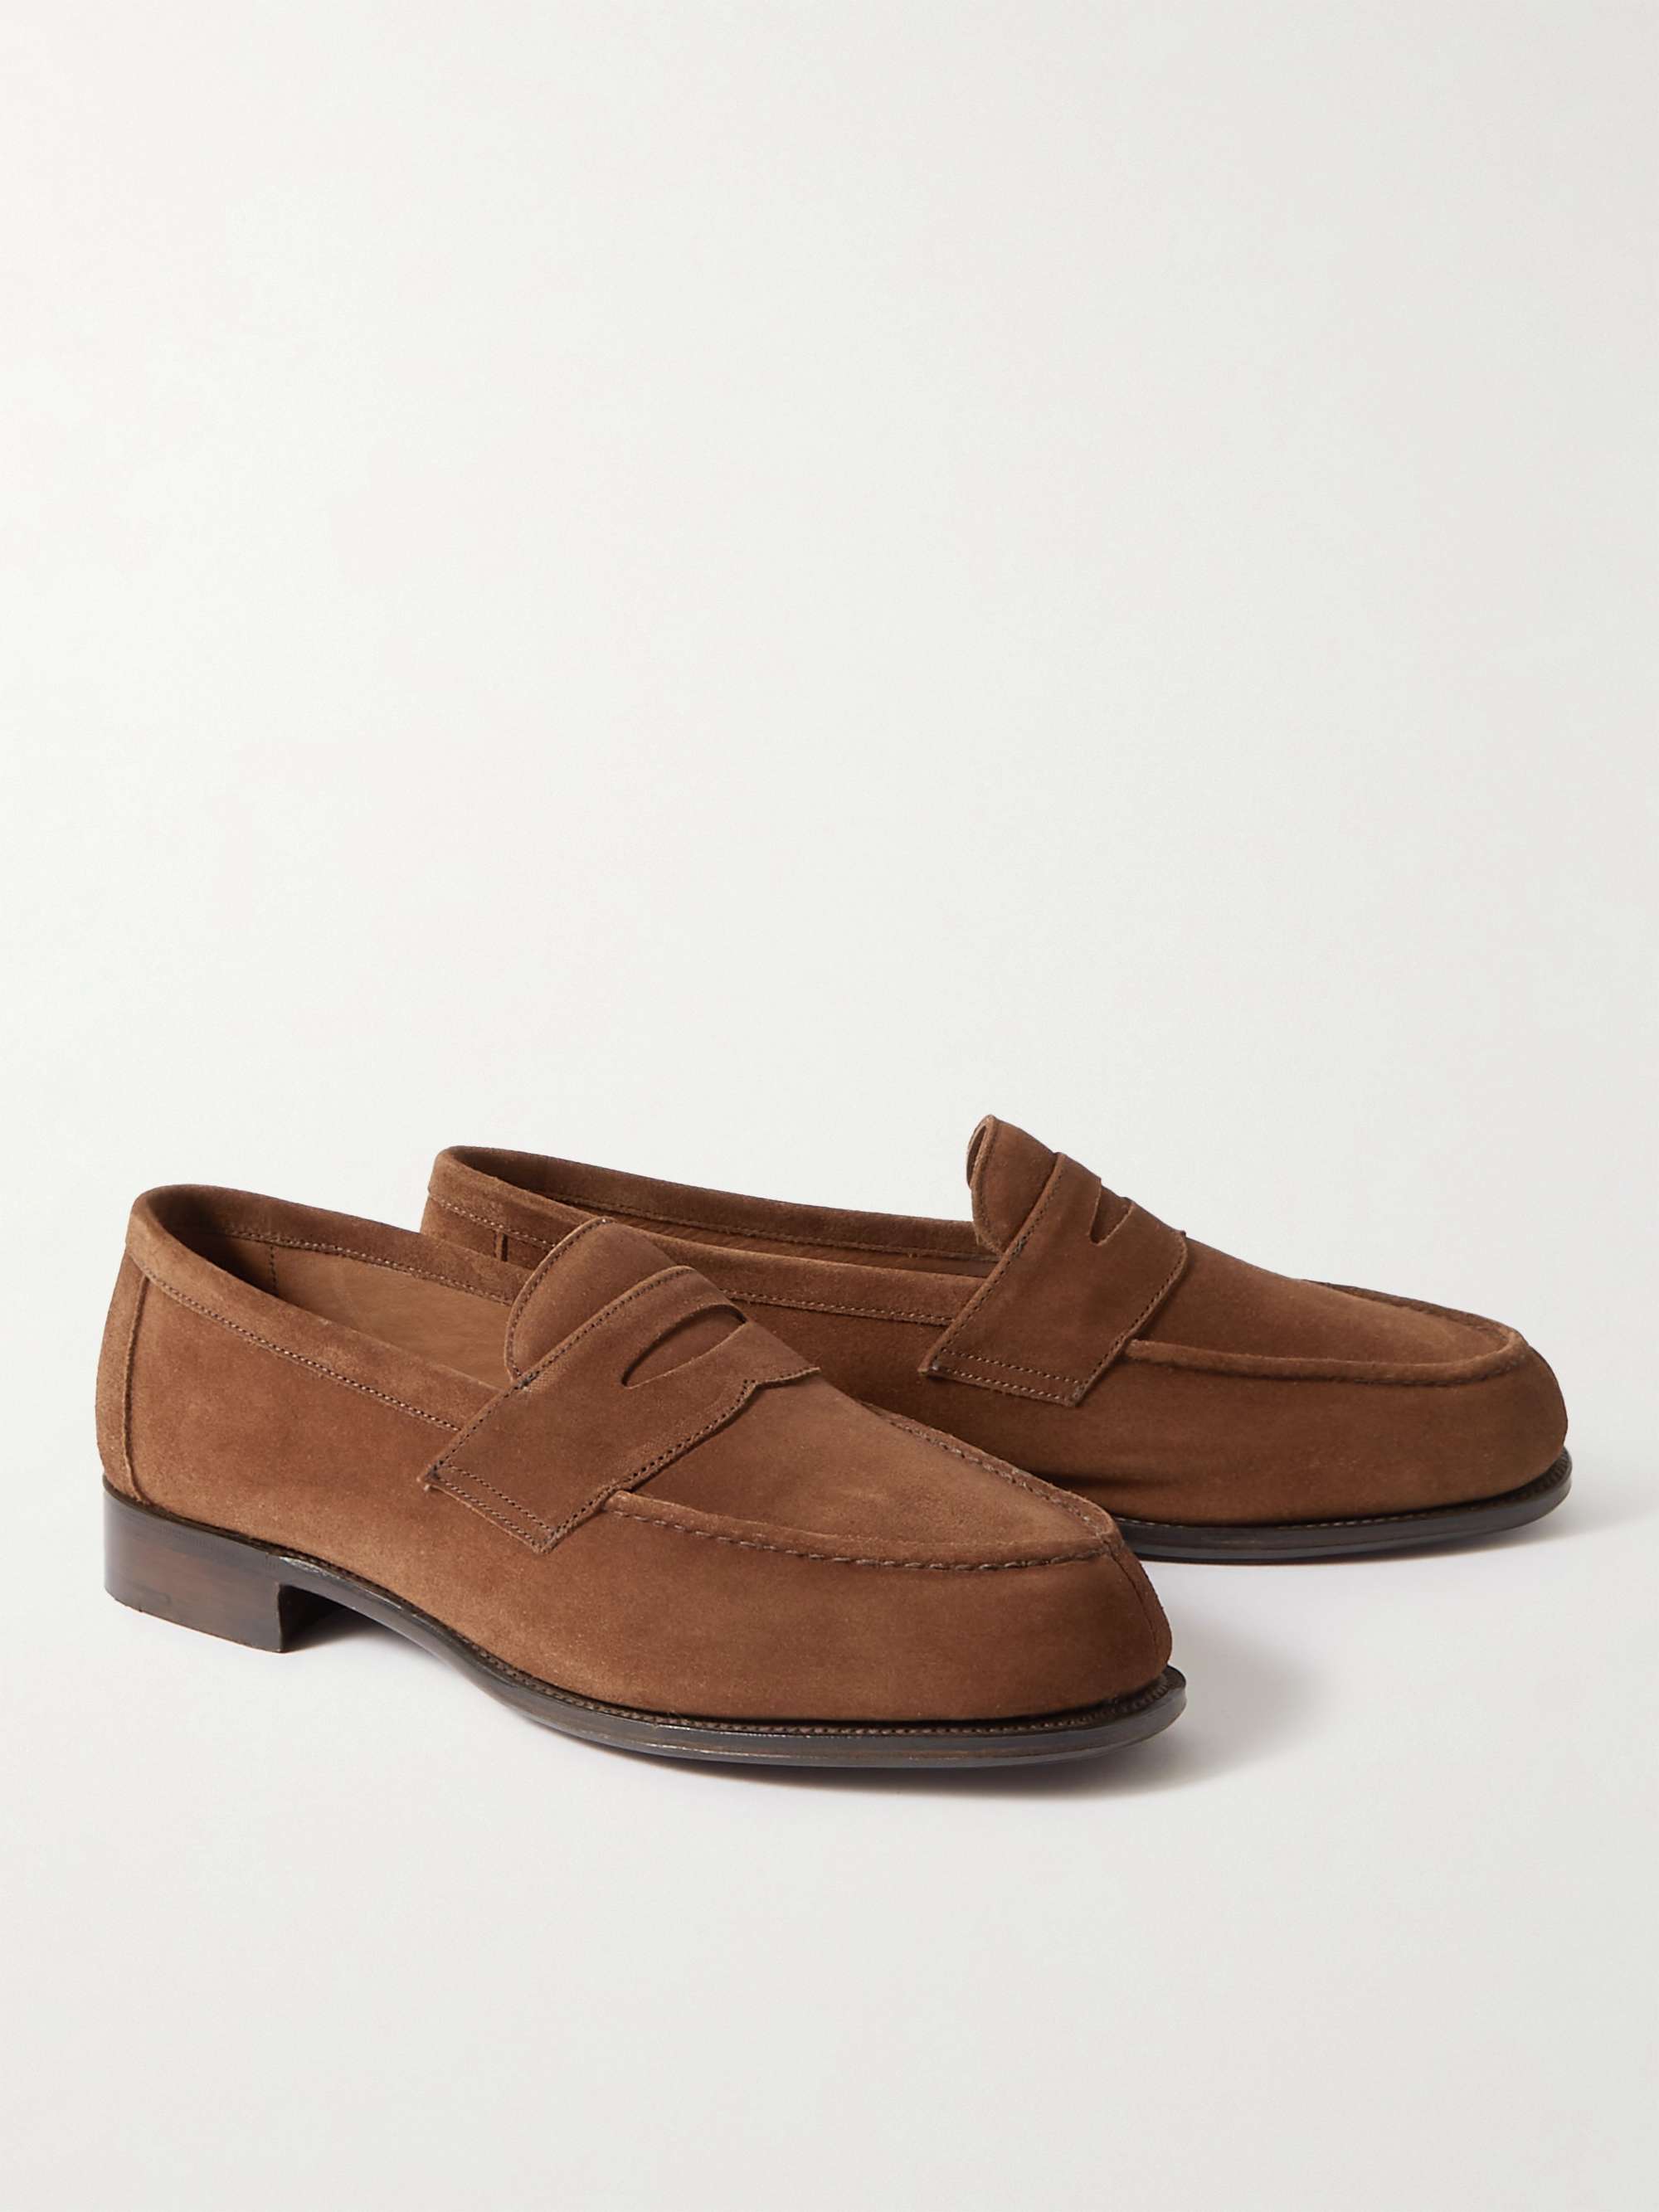 GEORGE CLEVERLEY Cannes Suede Penny Loafers